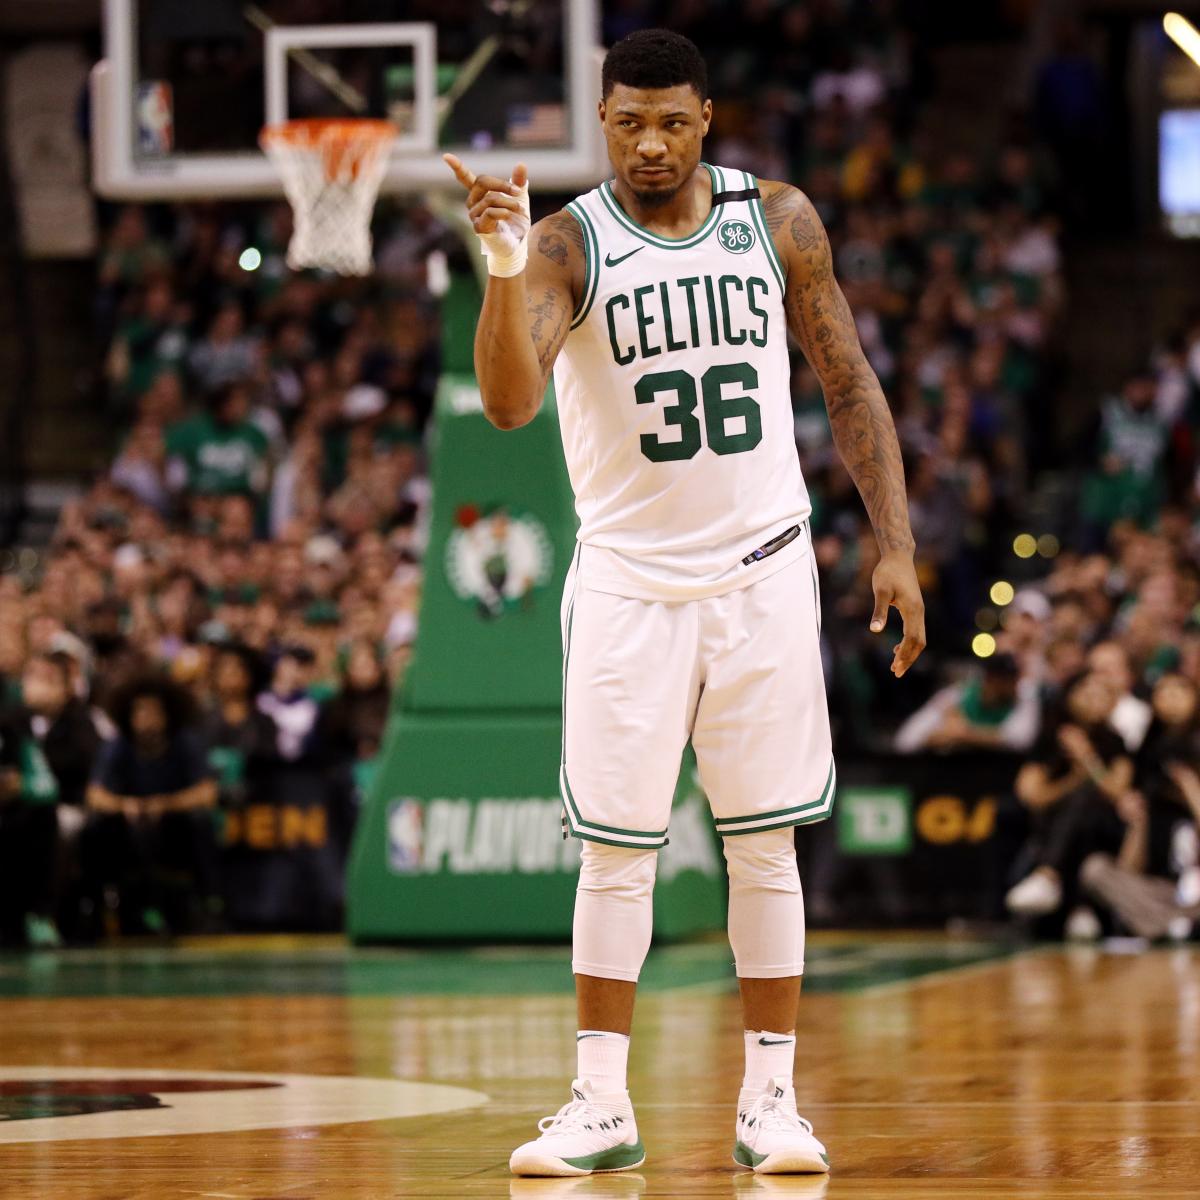 Report: Marcus Smart, Celtics Agree on 4-Year $52 Million Contract ...